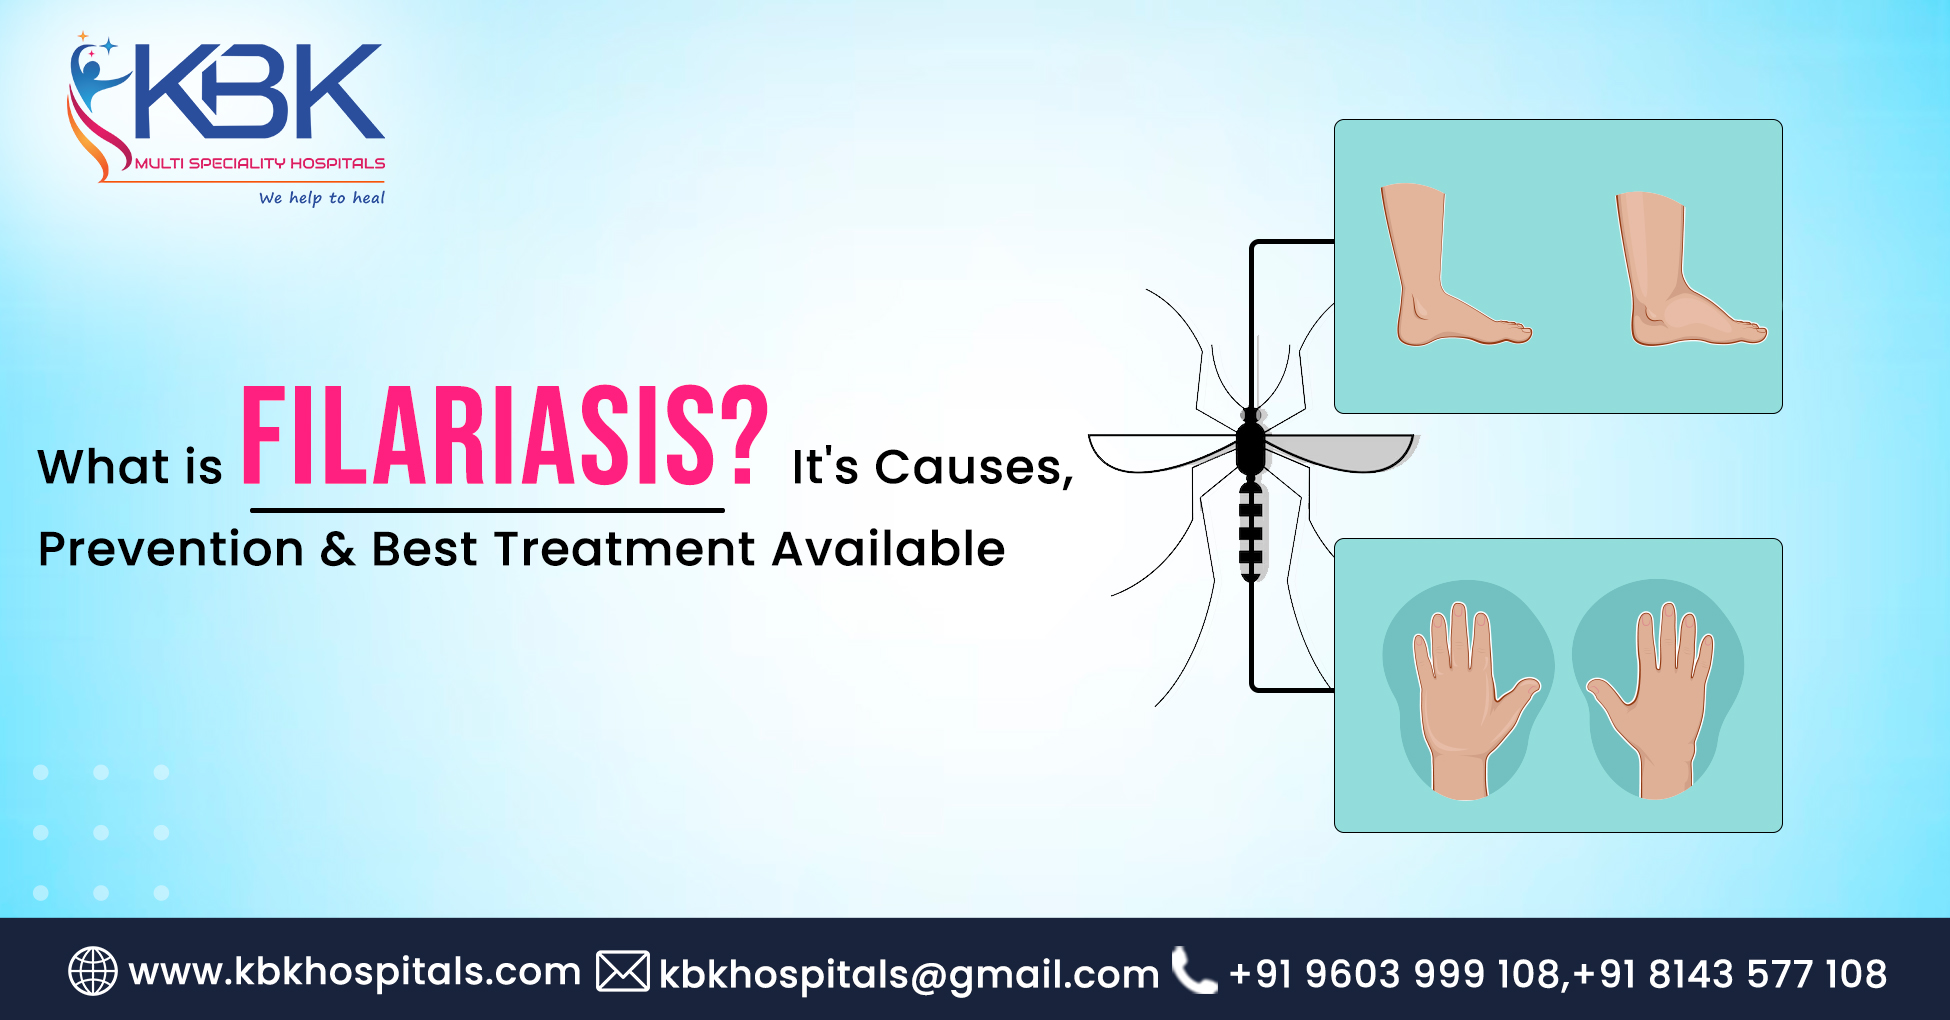 What is Filariasis? It's Causes, Prevention & Best treatment available.